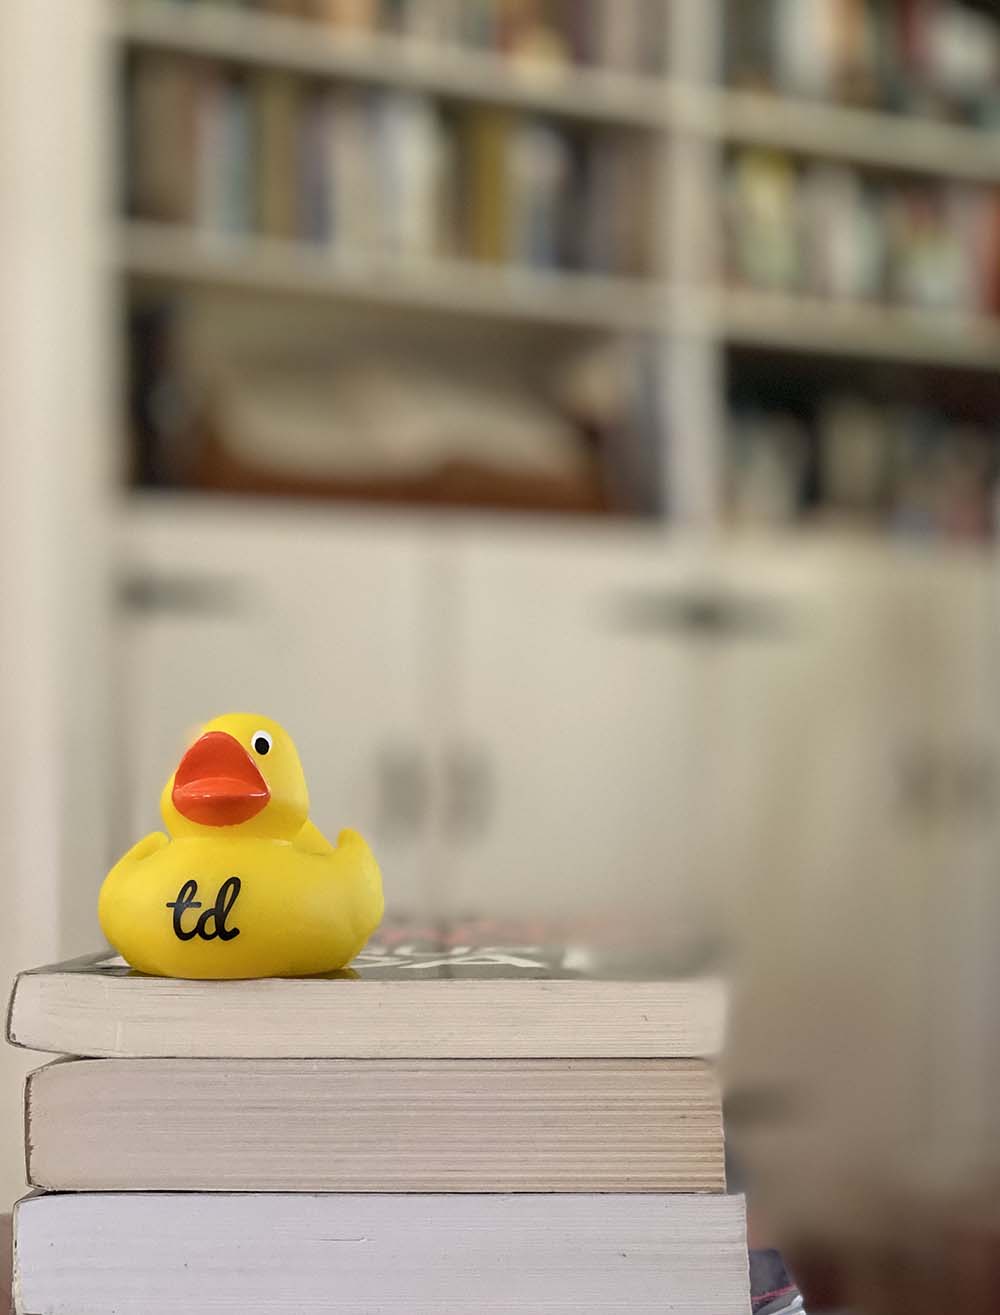 Test Double rubber duck programmer on books with bookcase in the background